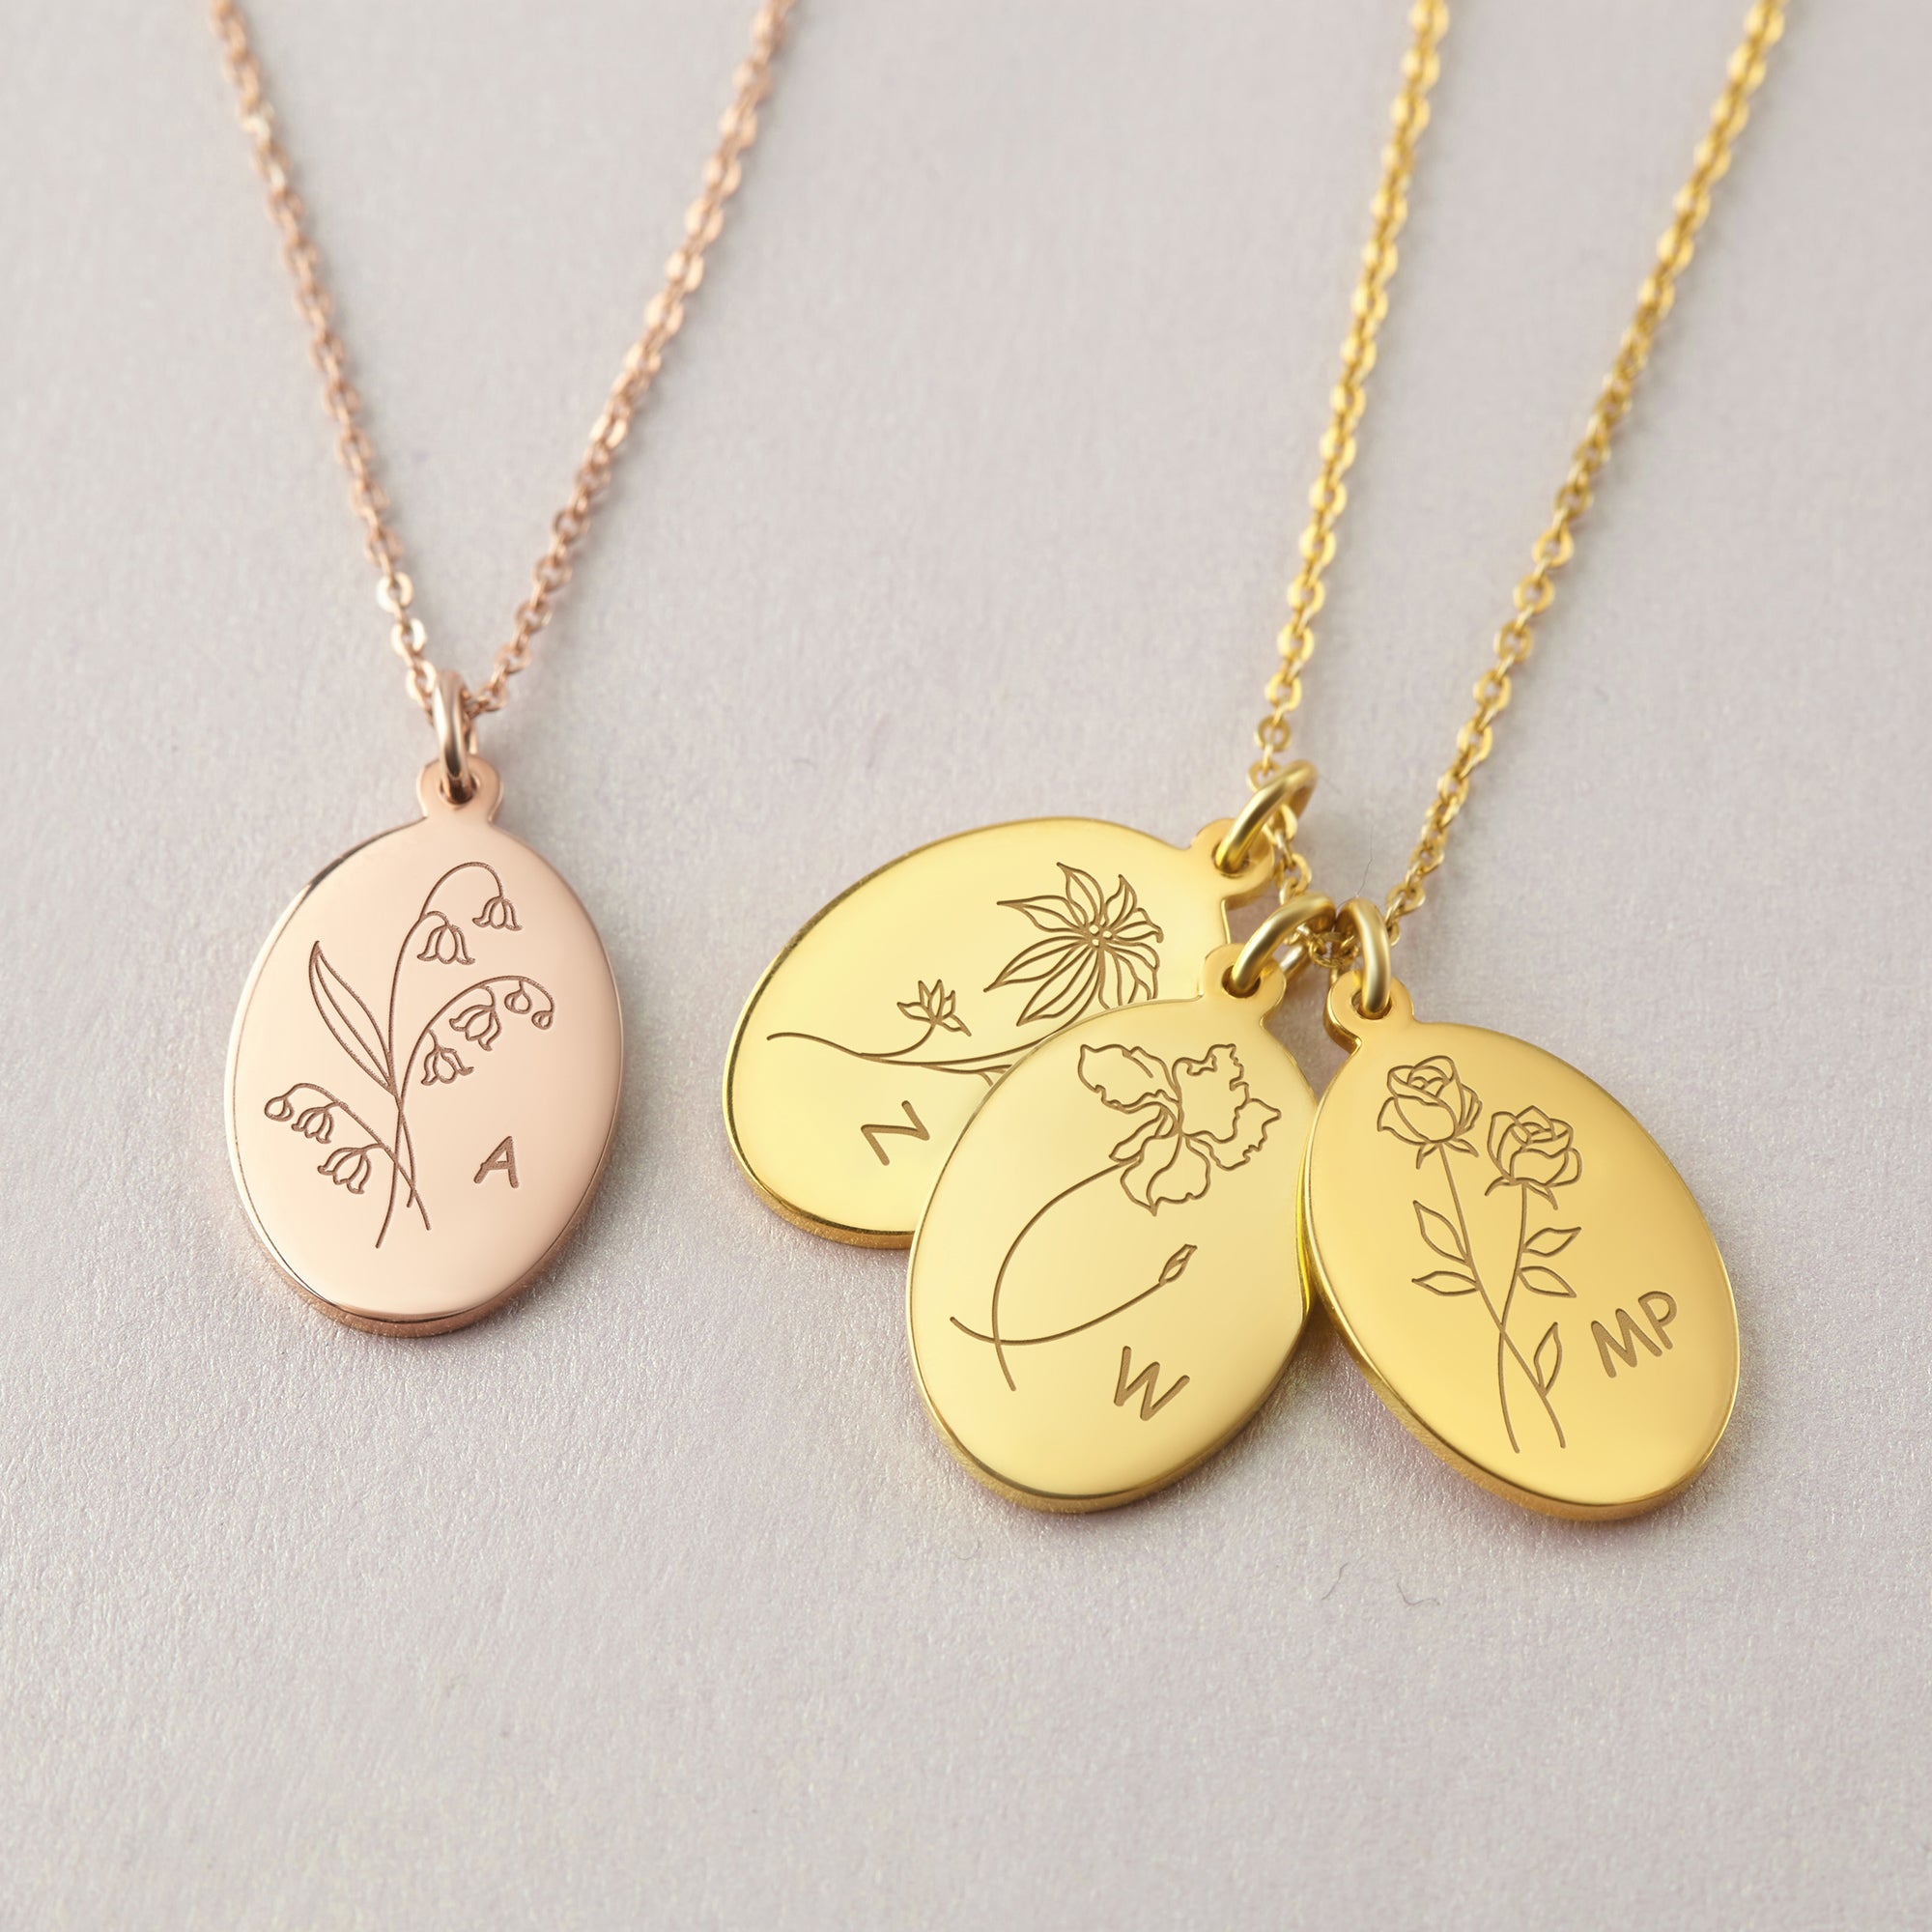 Personalized Birth Month Flower Necklace with Initials - Solid Sterling Silver, Gold or Rose Gold Plated - Gift Box Included - Necklaces - Bijou Her -  -  - 